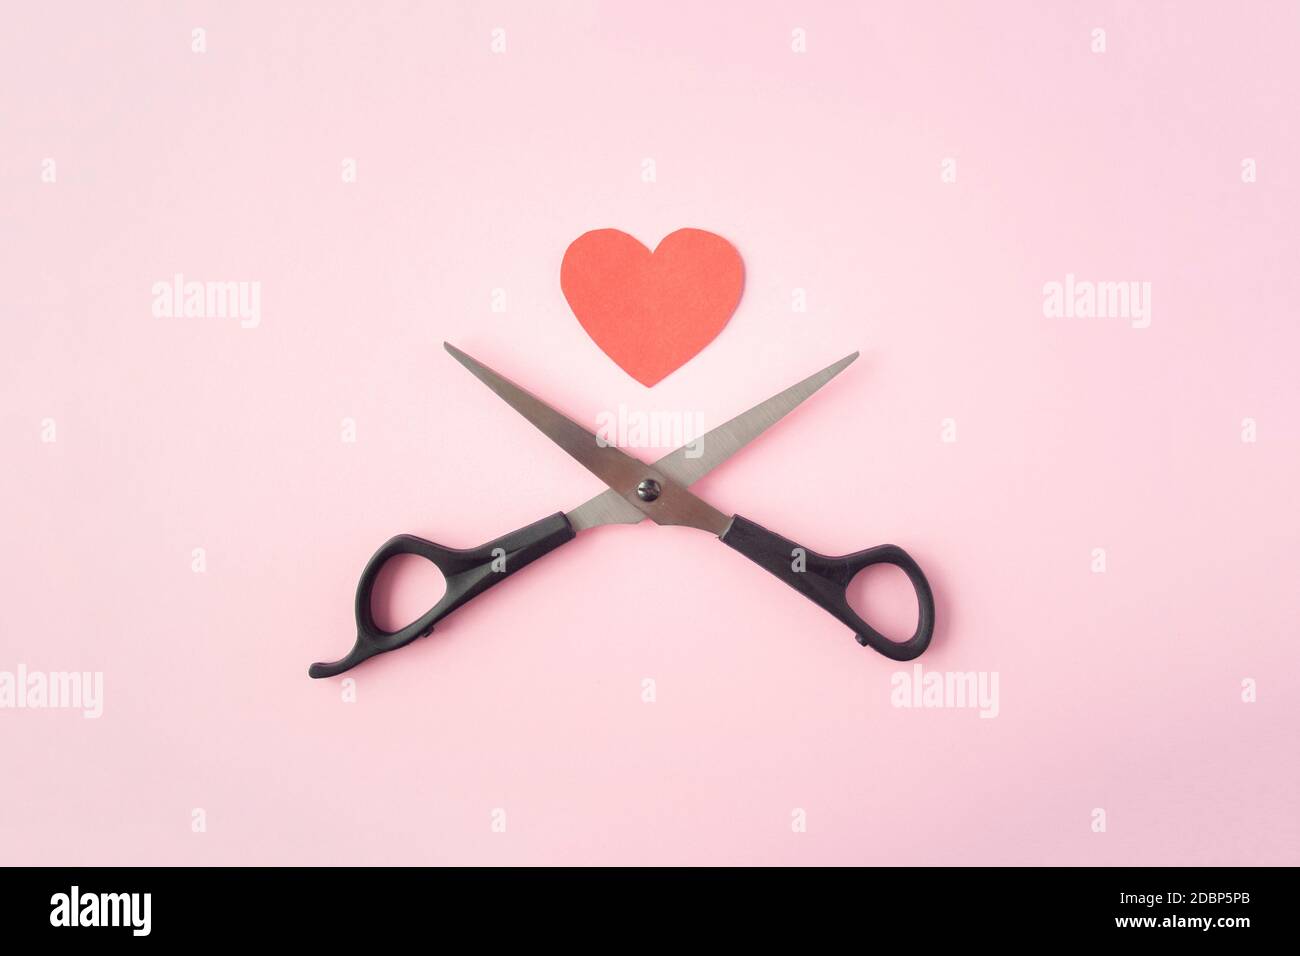 Scissors with red heart top view on pink background. Concept of divorce. Divorce proceedings, law, court, family break, pain Stock Photo